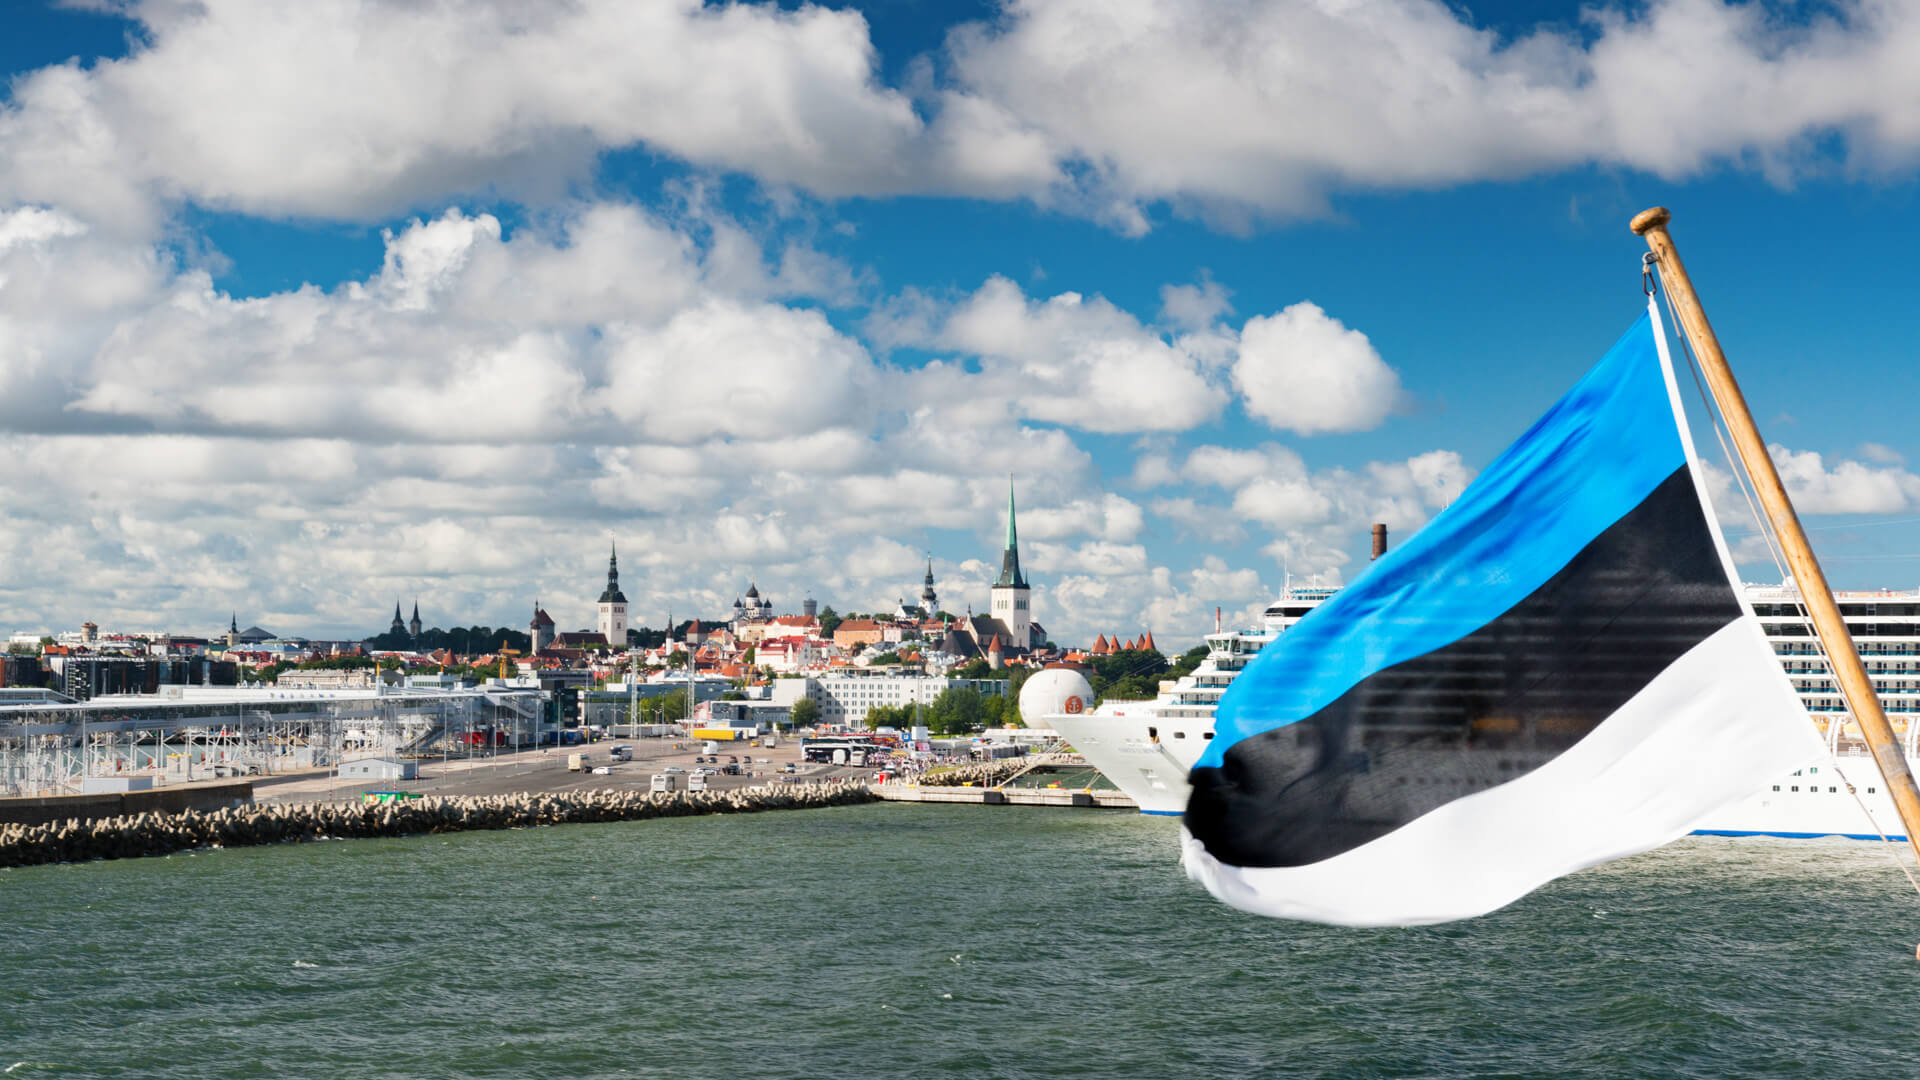 <p>The average cost for one person to spend a week in Tallinn is around $712. Here are some average daily prices you can expect:</p> <ul> <li><strong>Meals</strong>: $39</li> <li><strong>Transportation</strong>: $13 </li> <li><strong>Hotels</strong>: $101</li> </ul> <p>Tallinn is the City of Music, according to UNESCO, and is a World Heritage site that rivals many Western European cities in beauty. The city's well-preserved Hanseatic architecture, cobblestone streets and vibrant arts scene make it a fantastic and affordable alternative to more expensive destinations.</p>